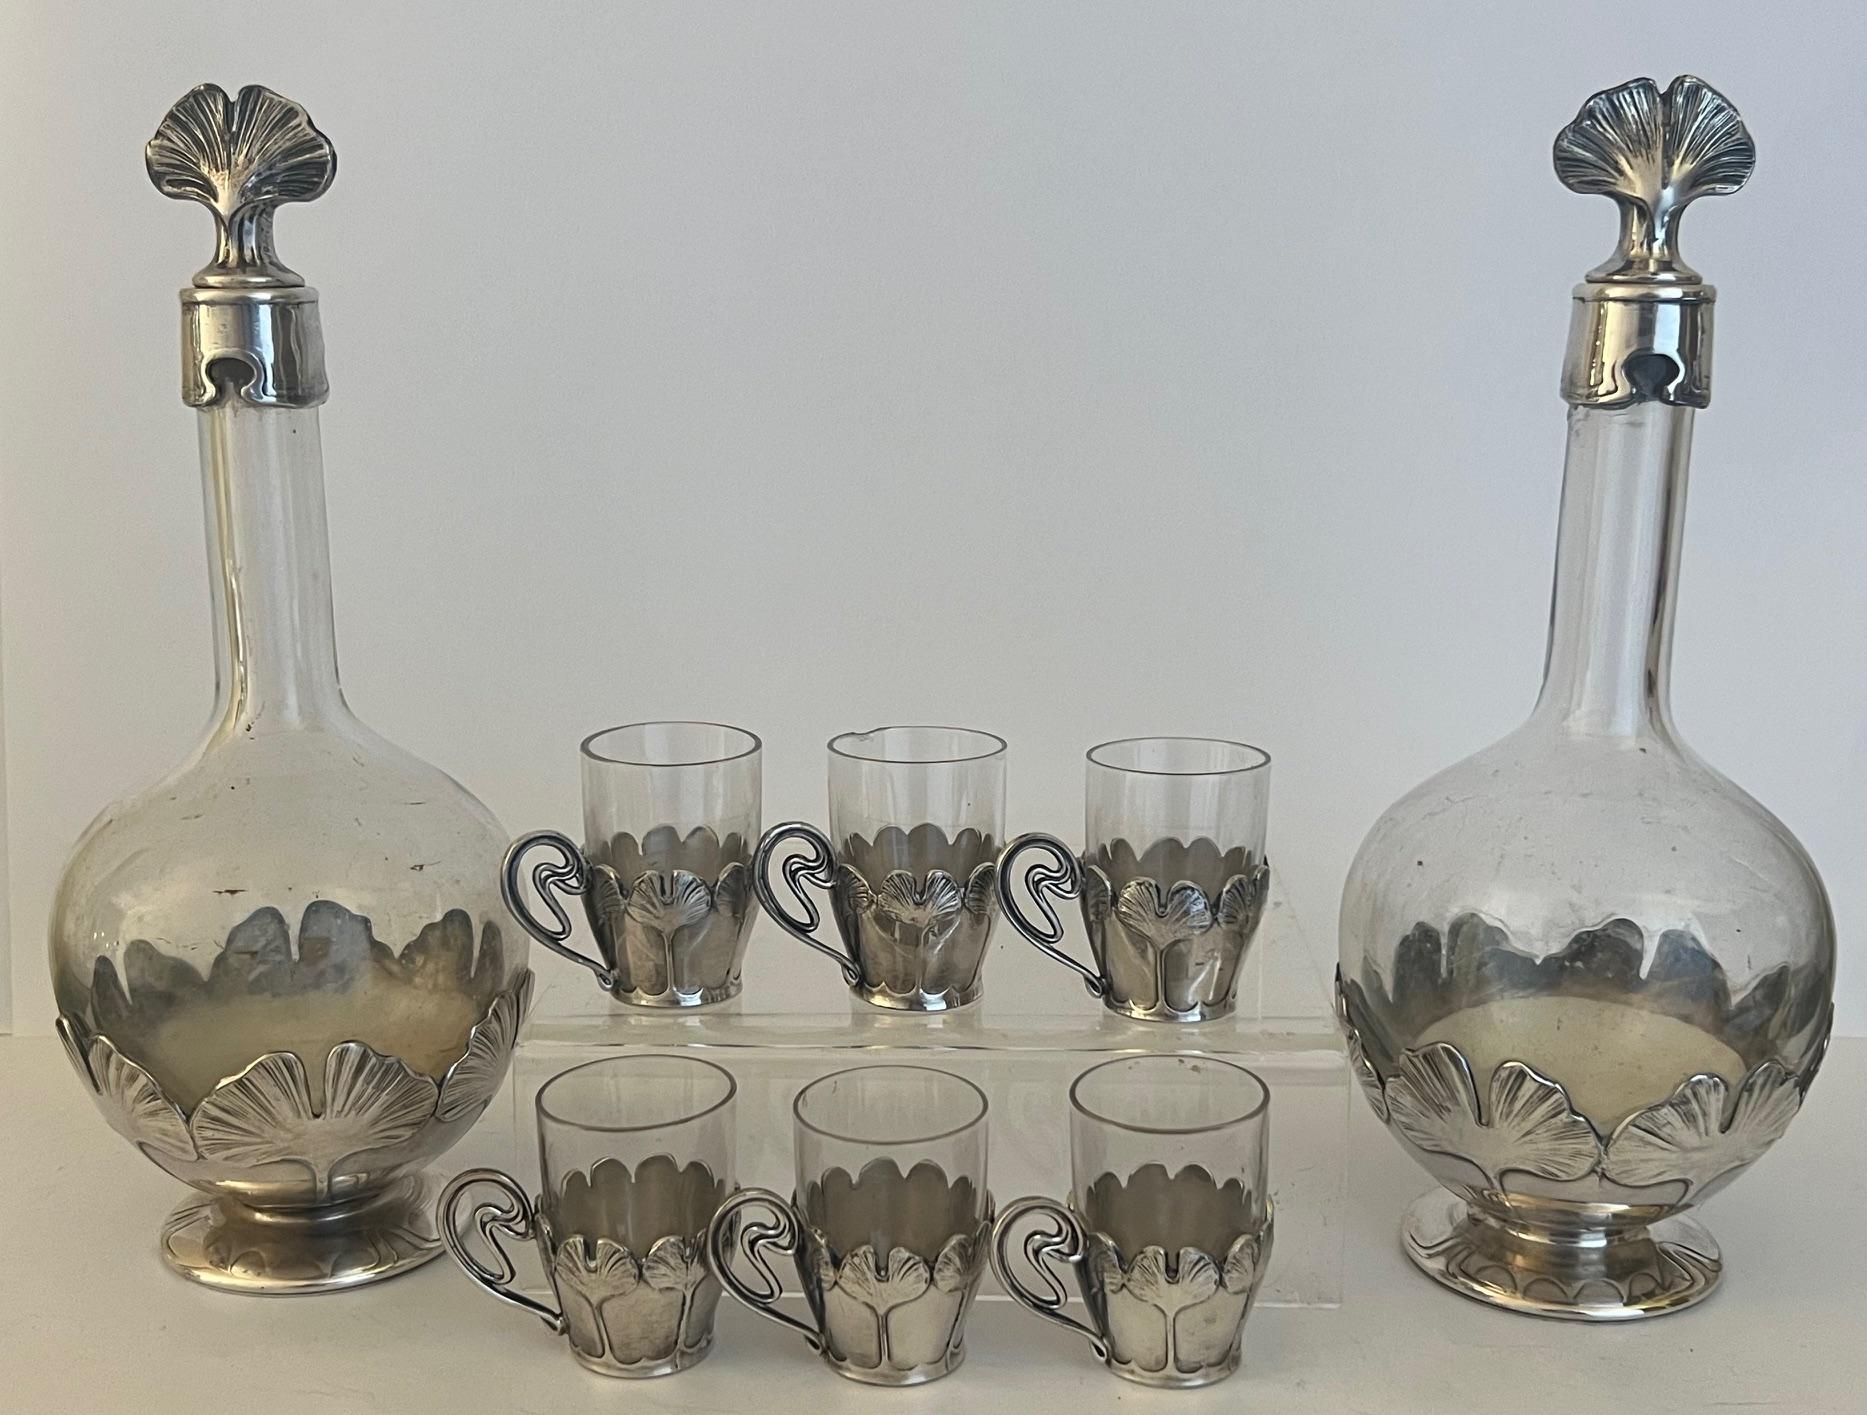 Early 20th Century Christofle Art Nouveau Decanter and Glass Set of 8 For Sale 10